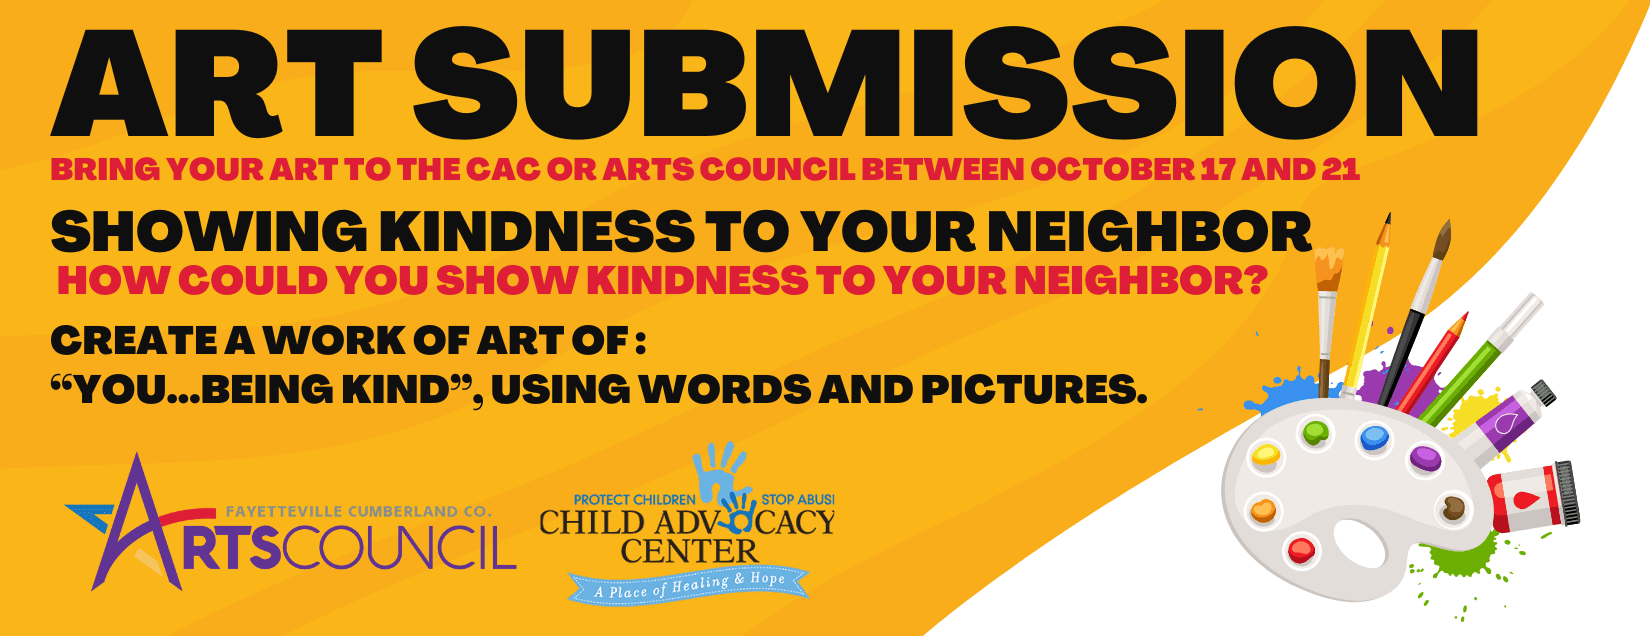 Submit Your Art between October 17-October 21! Art Contest for Child Abuse Prevention